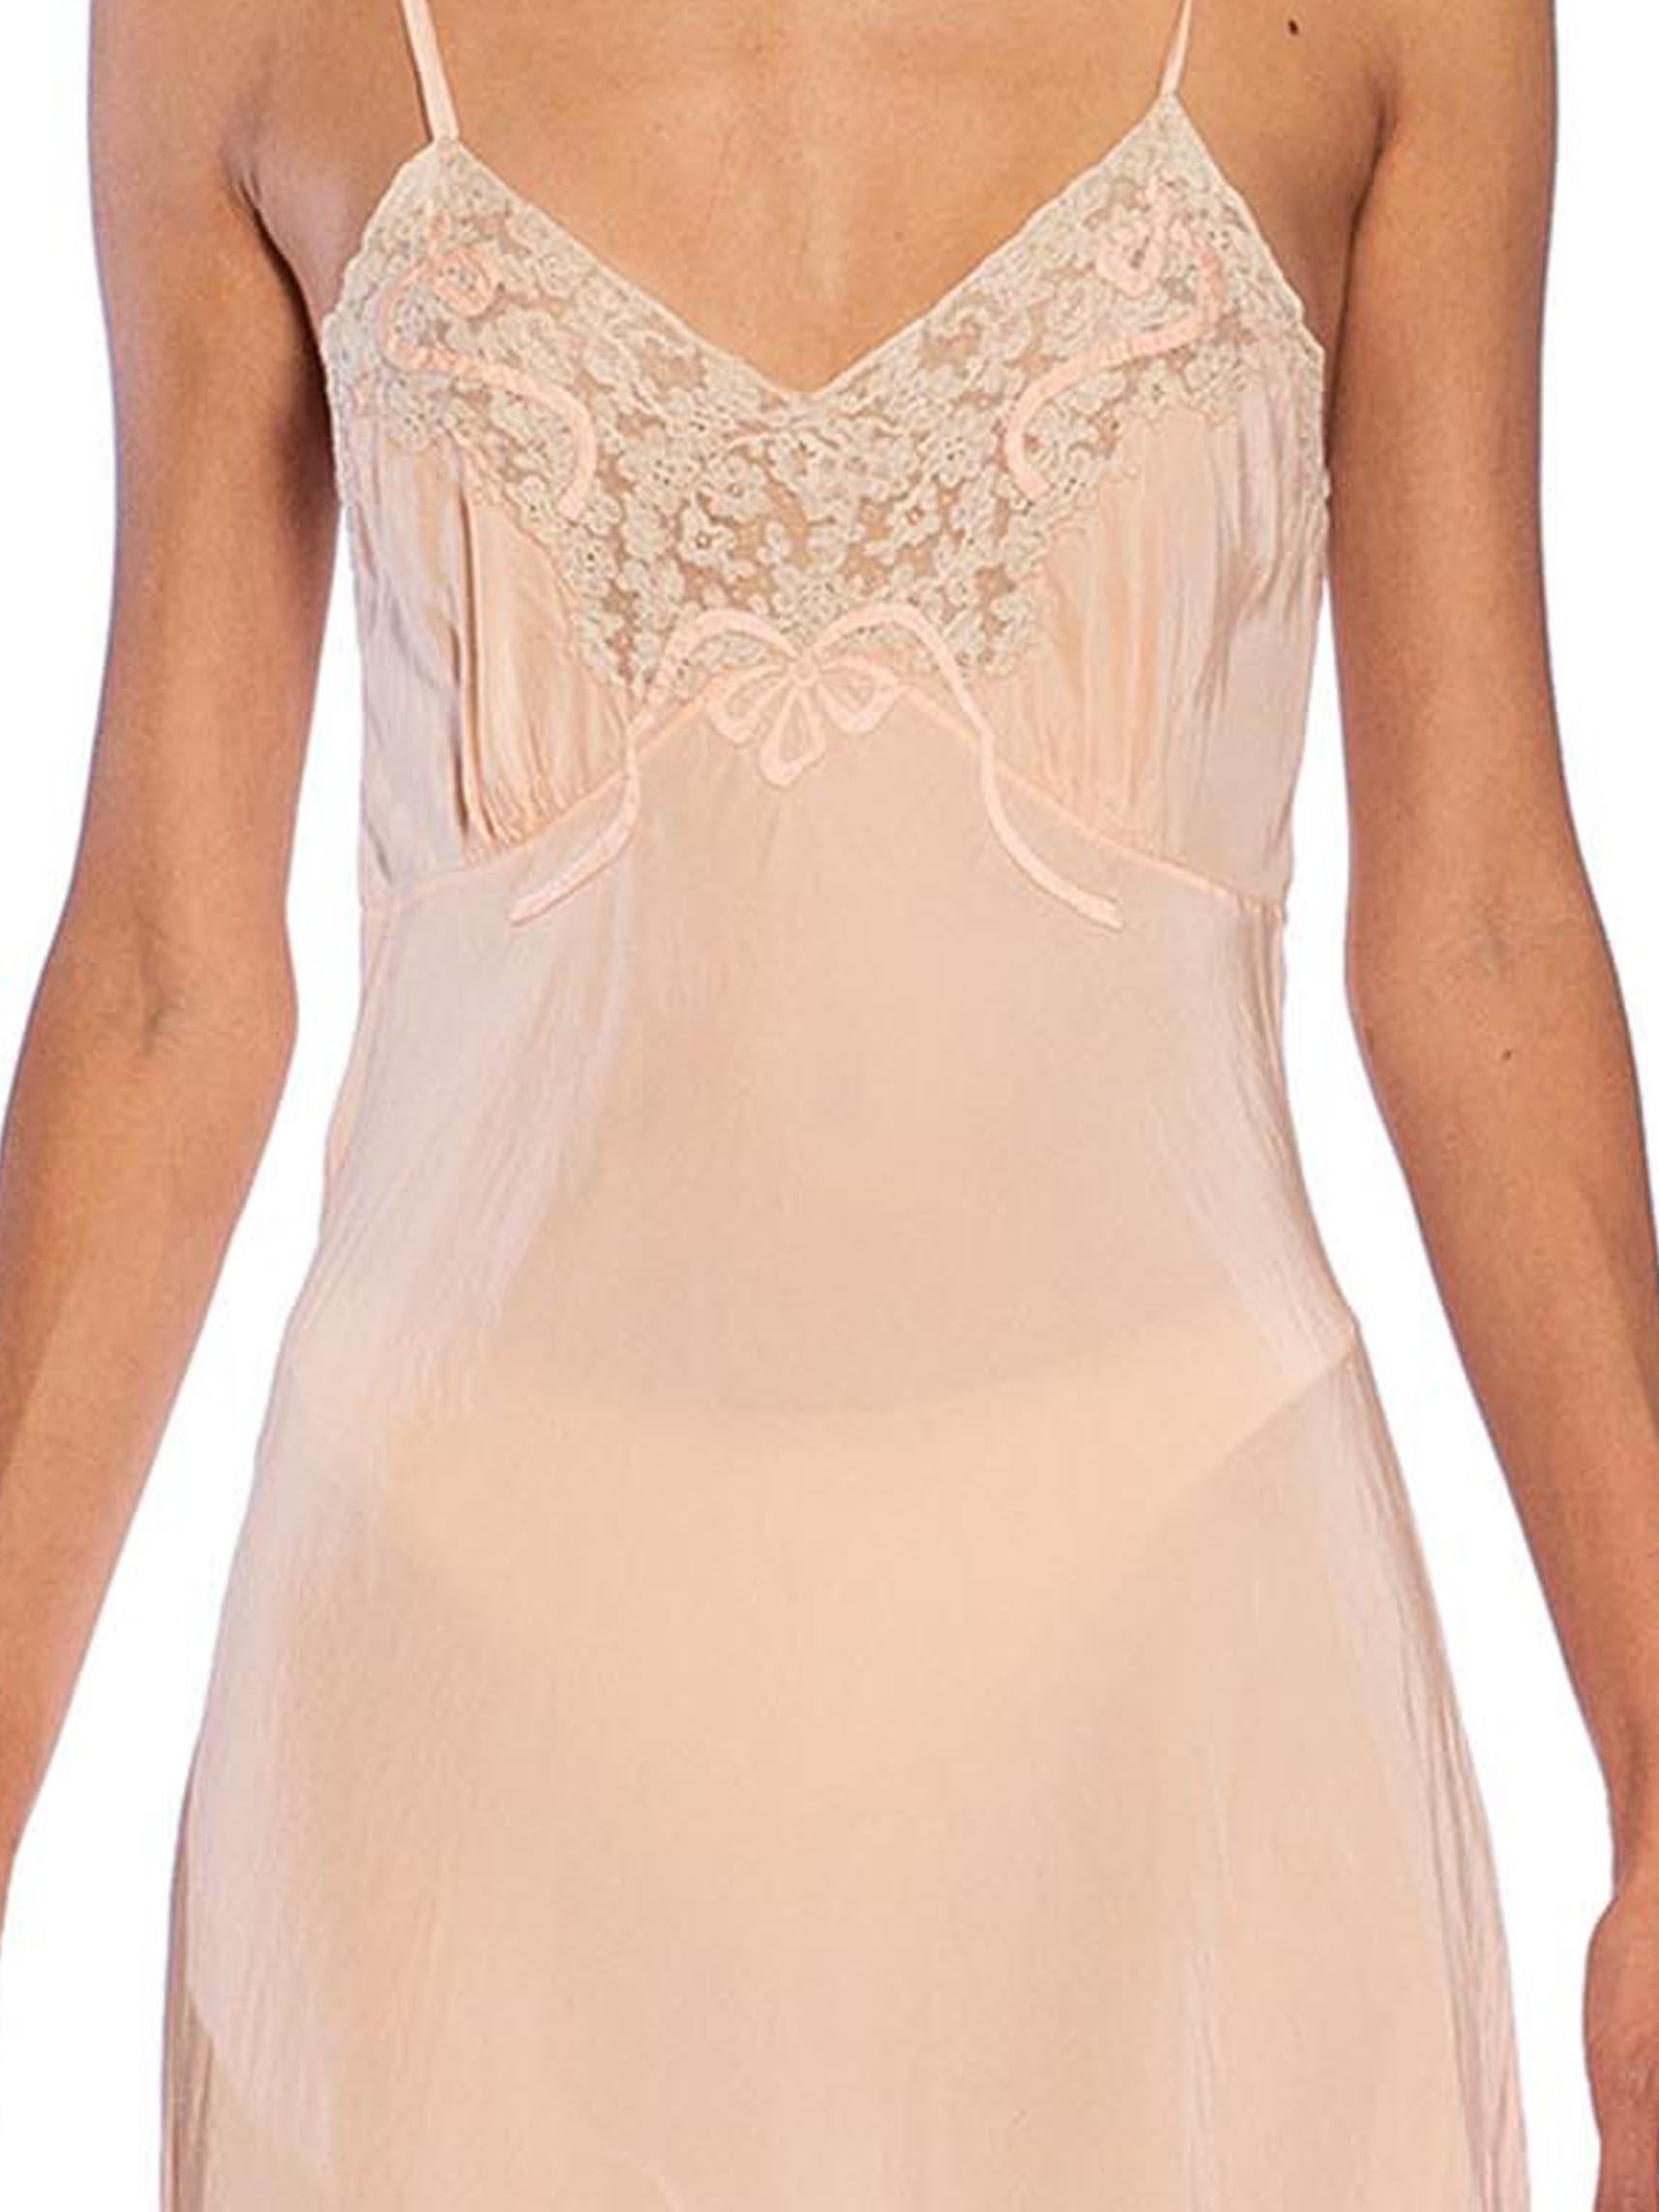 1950S Peach Silk Lace Entirely Hand Made Slip 4